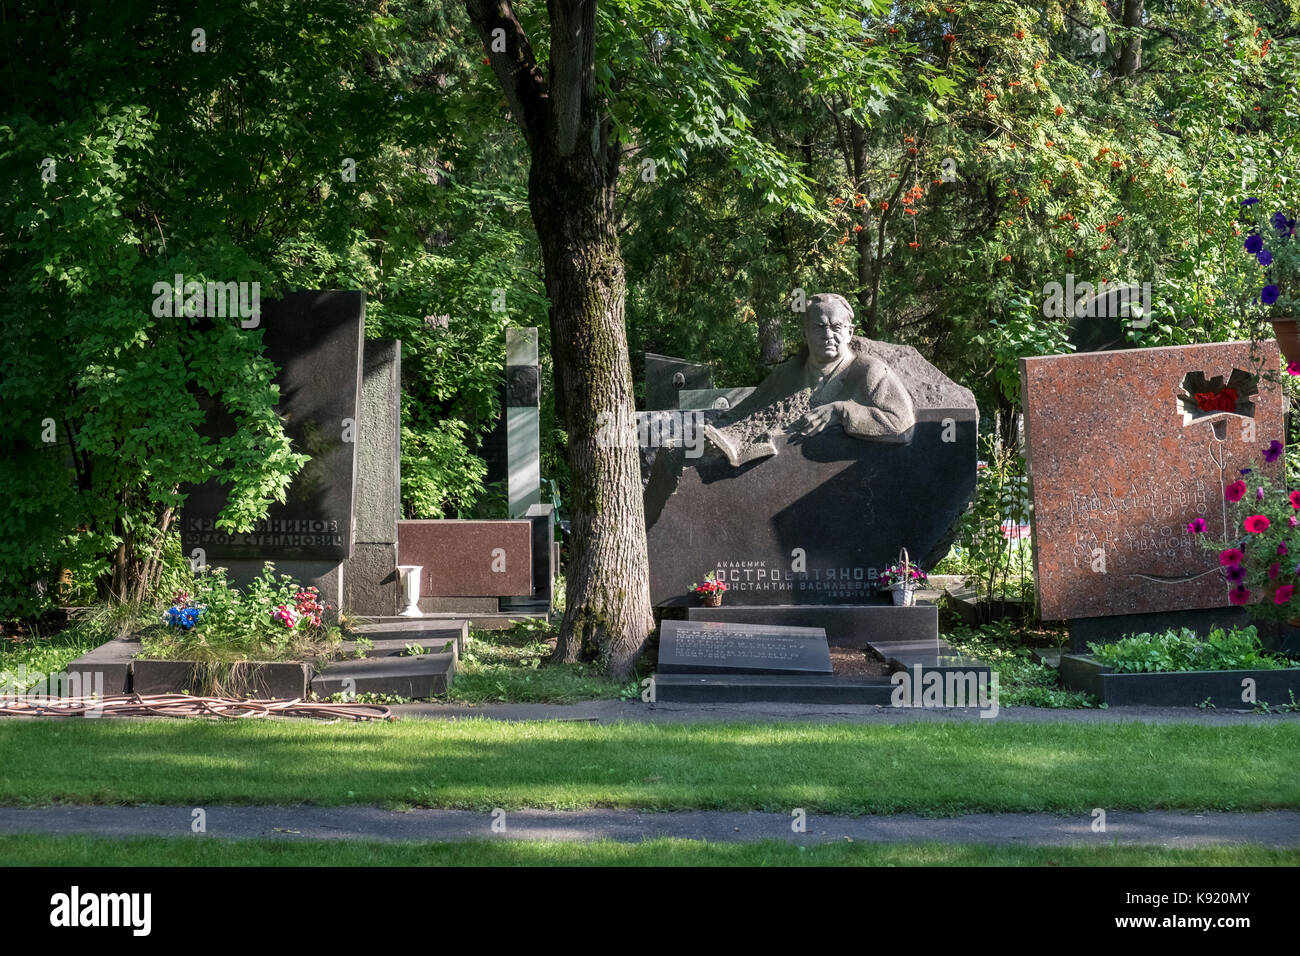 Headstones of significant Russians buried at the famous Novodevichy Cemetery, Moscow, Russia. Stock Photo